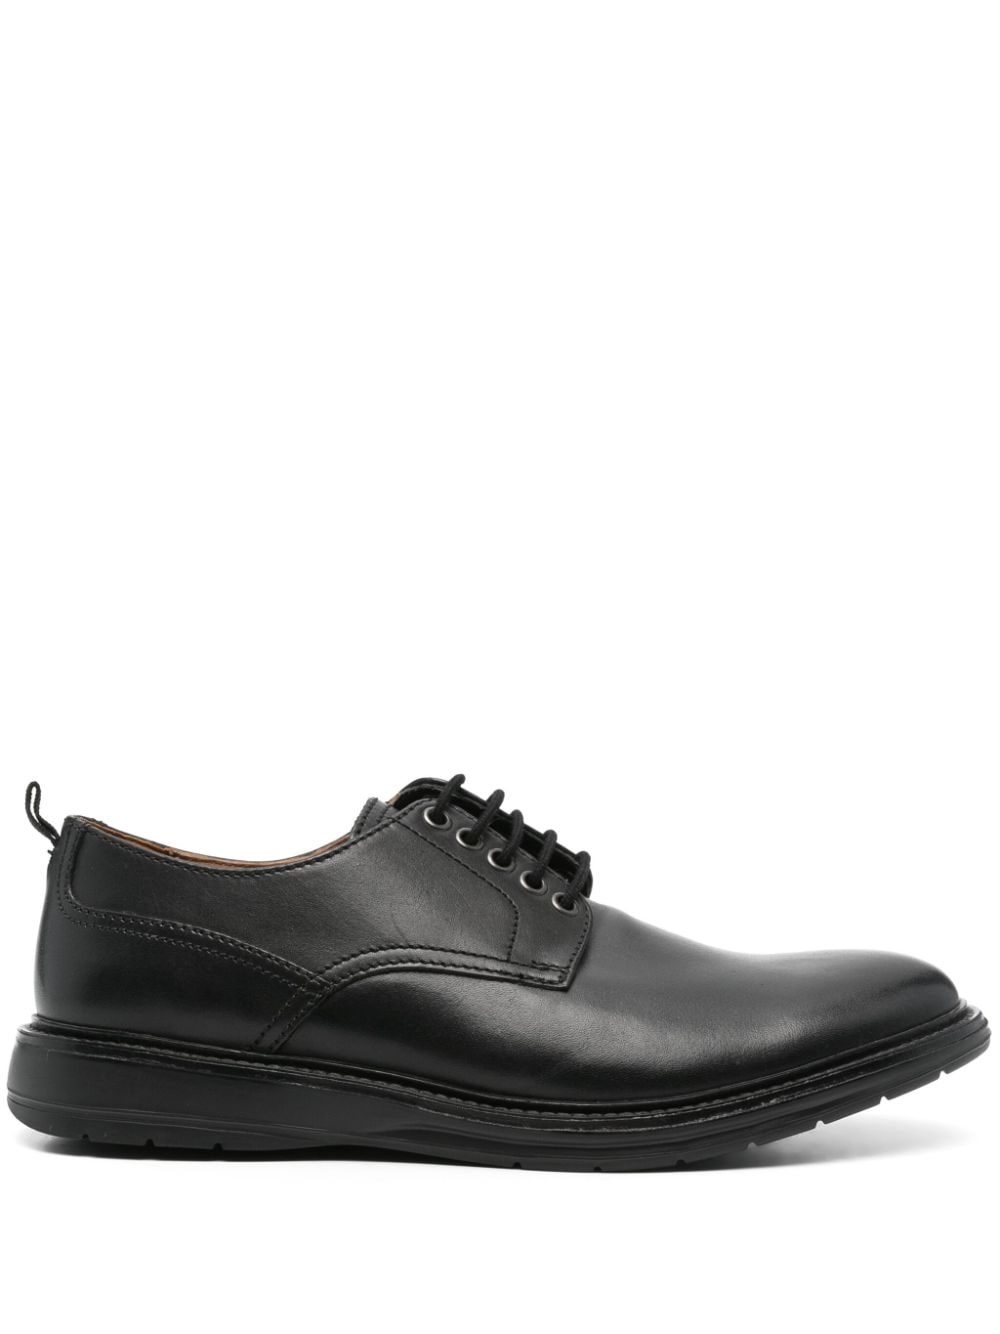 Clarks Chantry Walk Leather Derby Shoes In Black